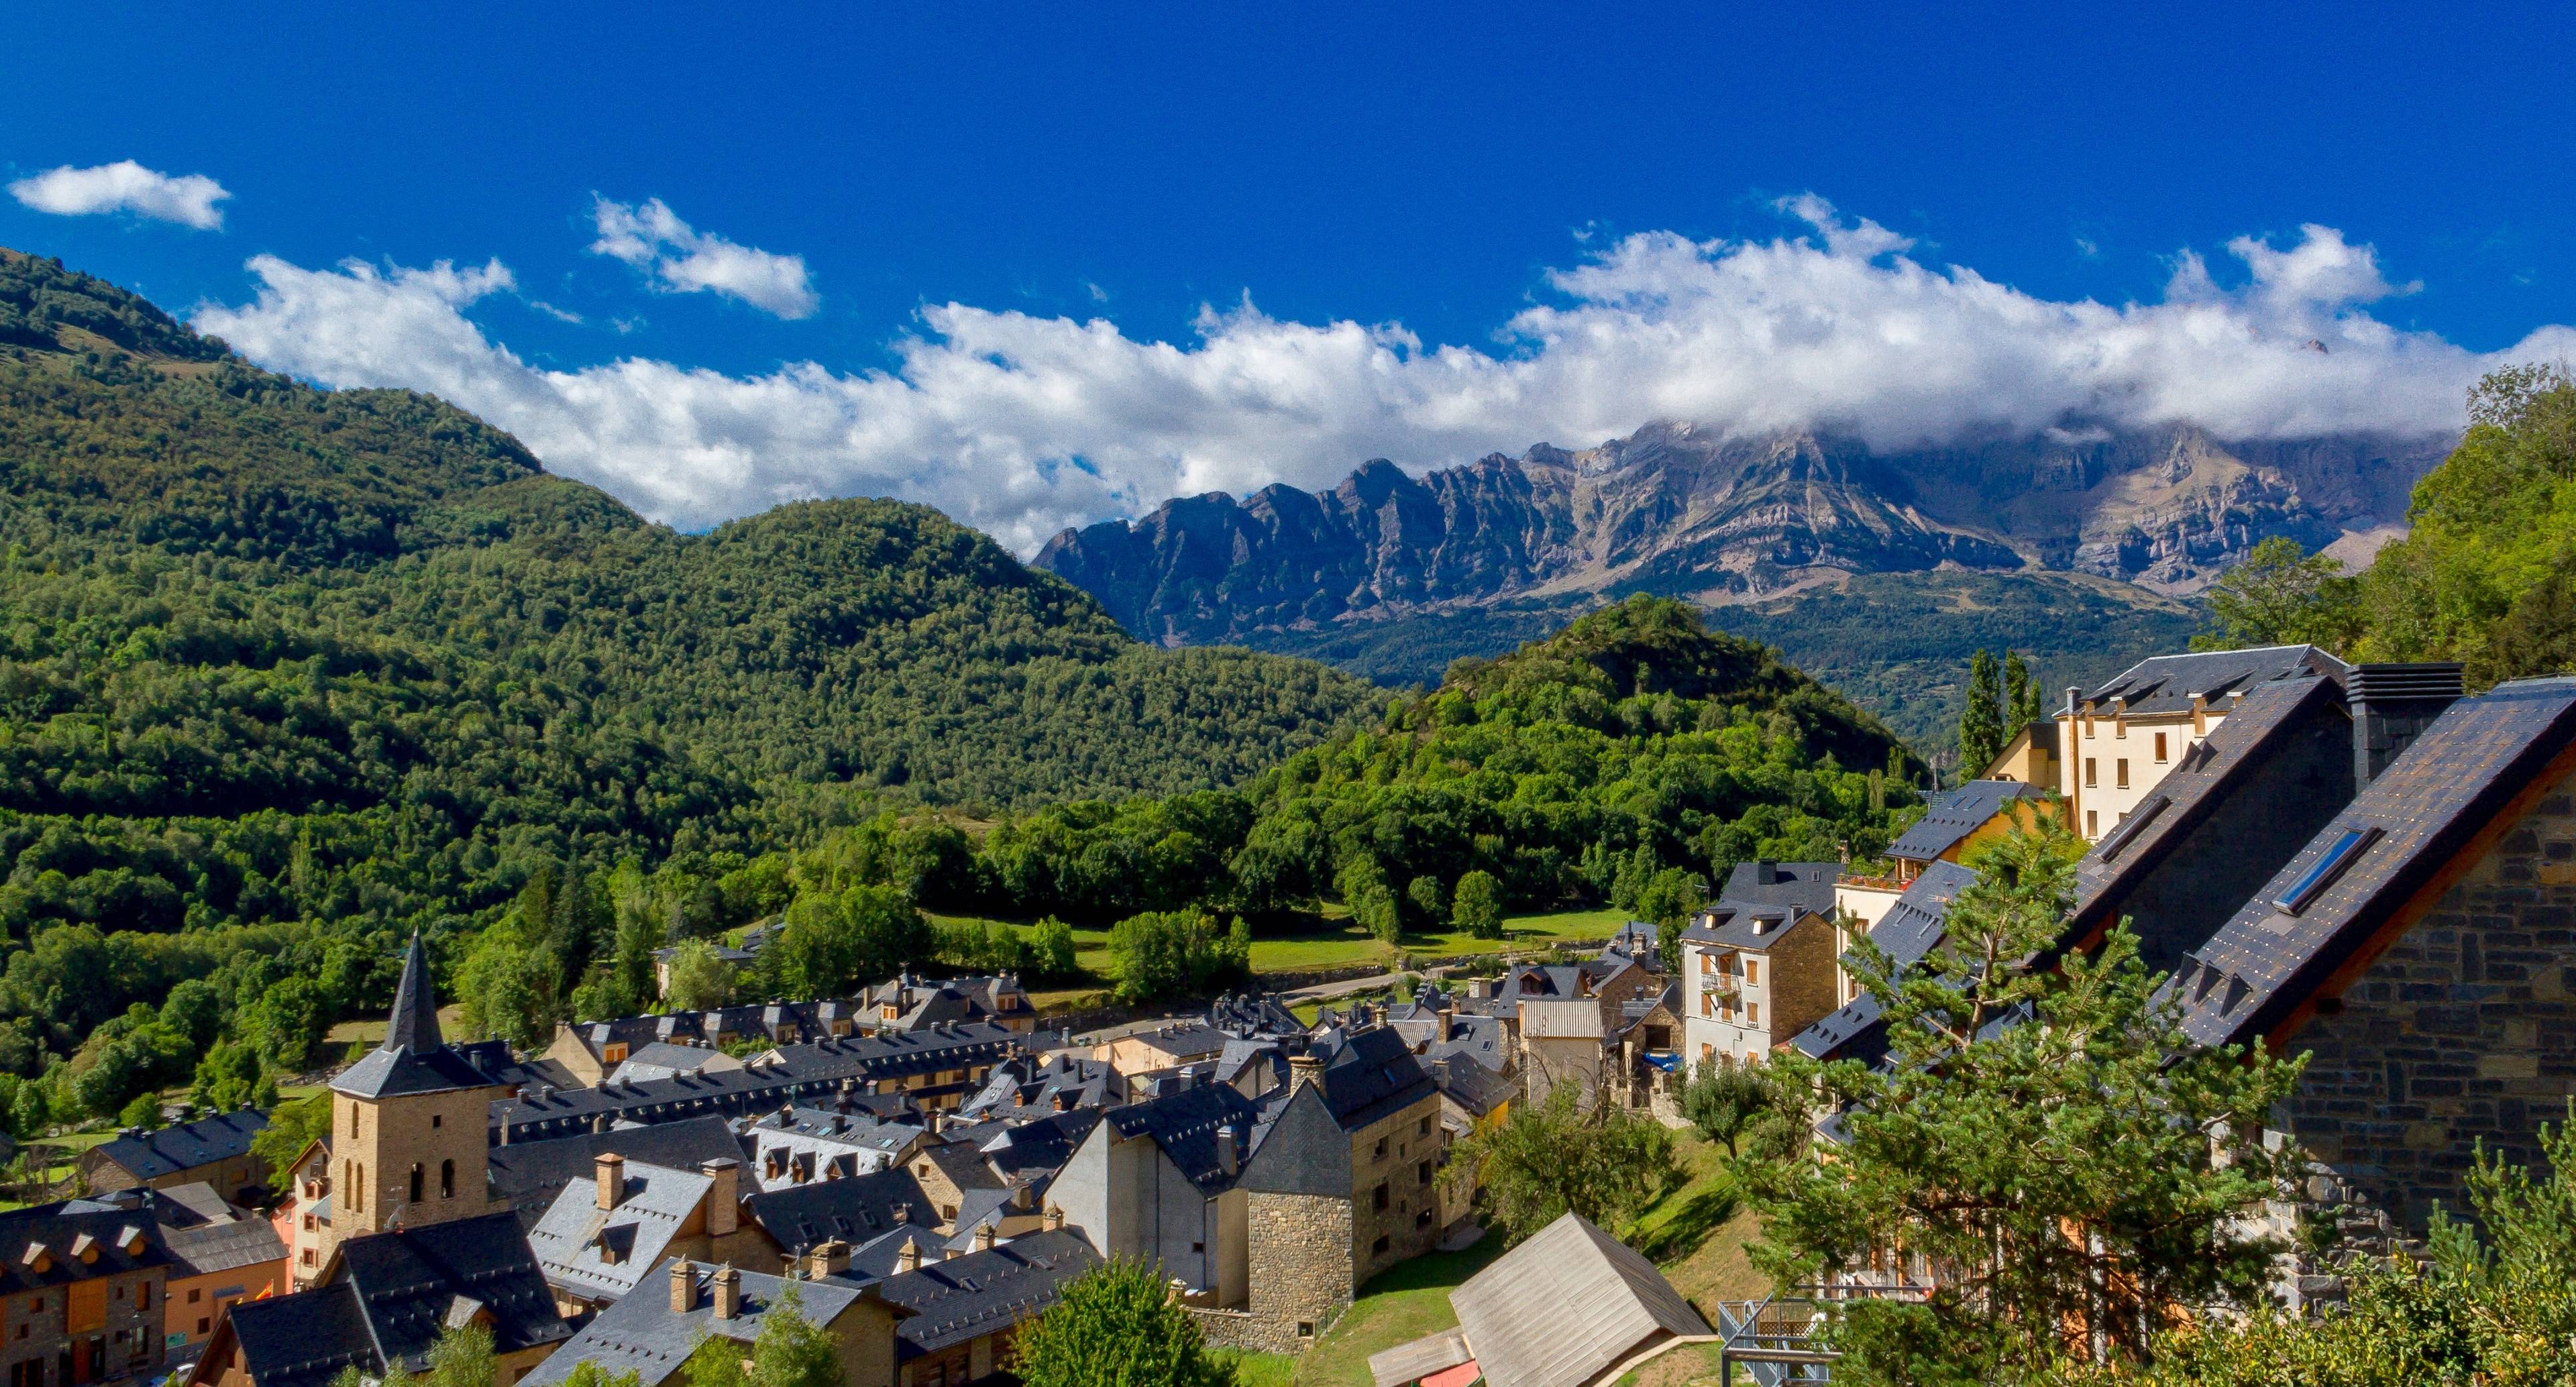 Tena Valley: One of the Most Stunning Valleys in the Pyrenees